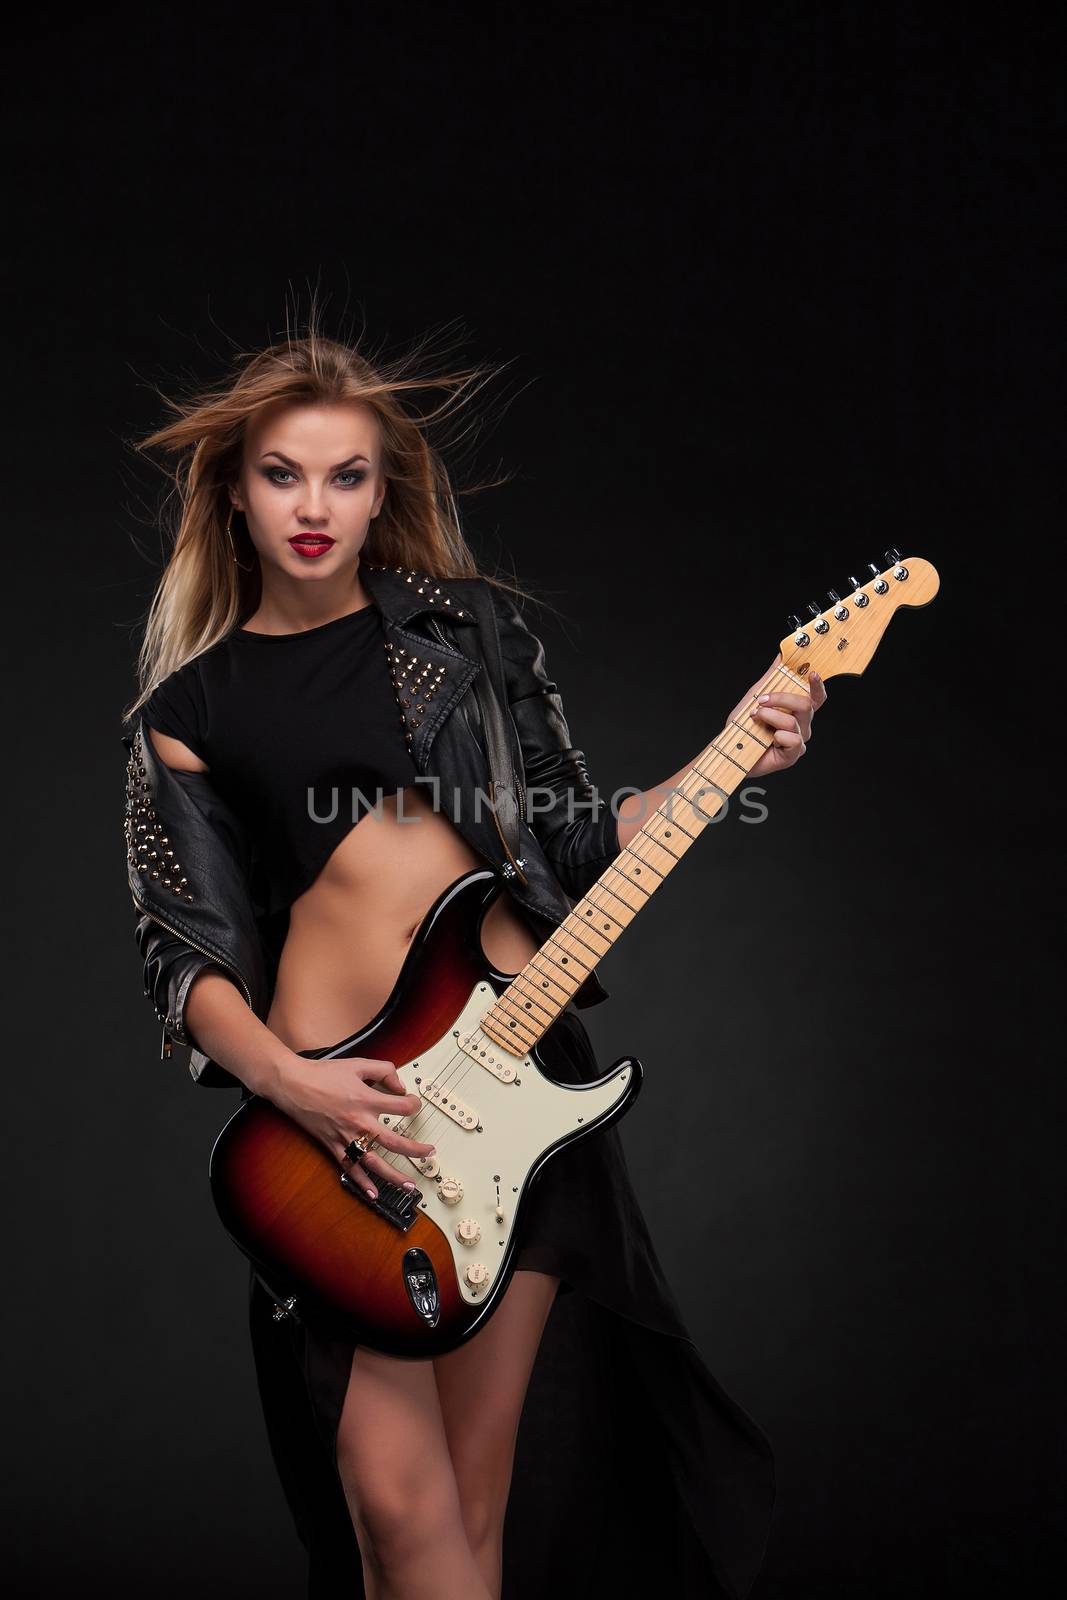 Beautiful blonde girl playing guitar in rock style on a black background